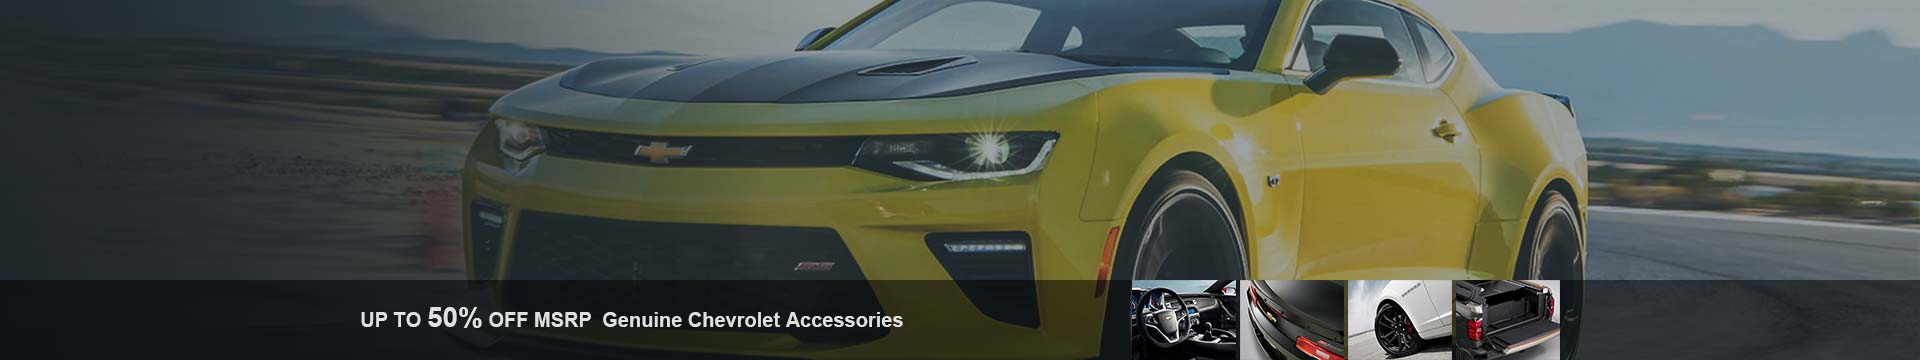 Shop Chevrolet accessories with lowest prices